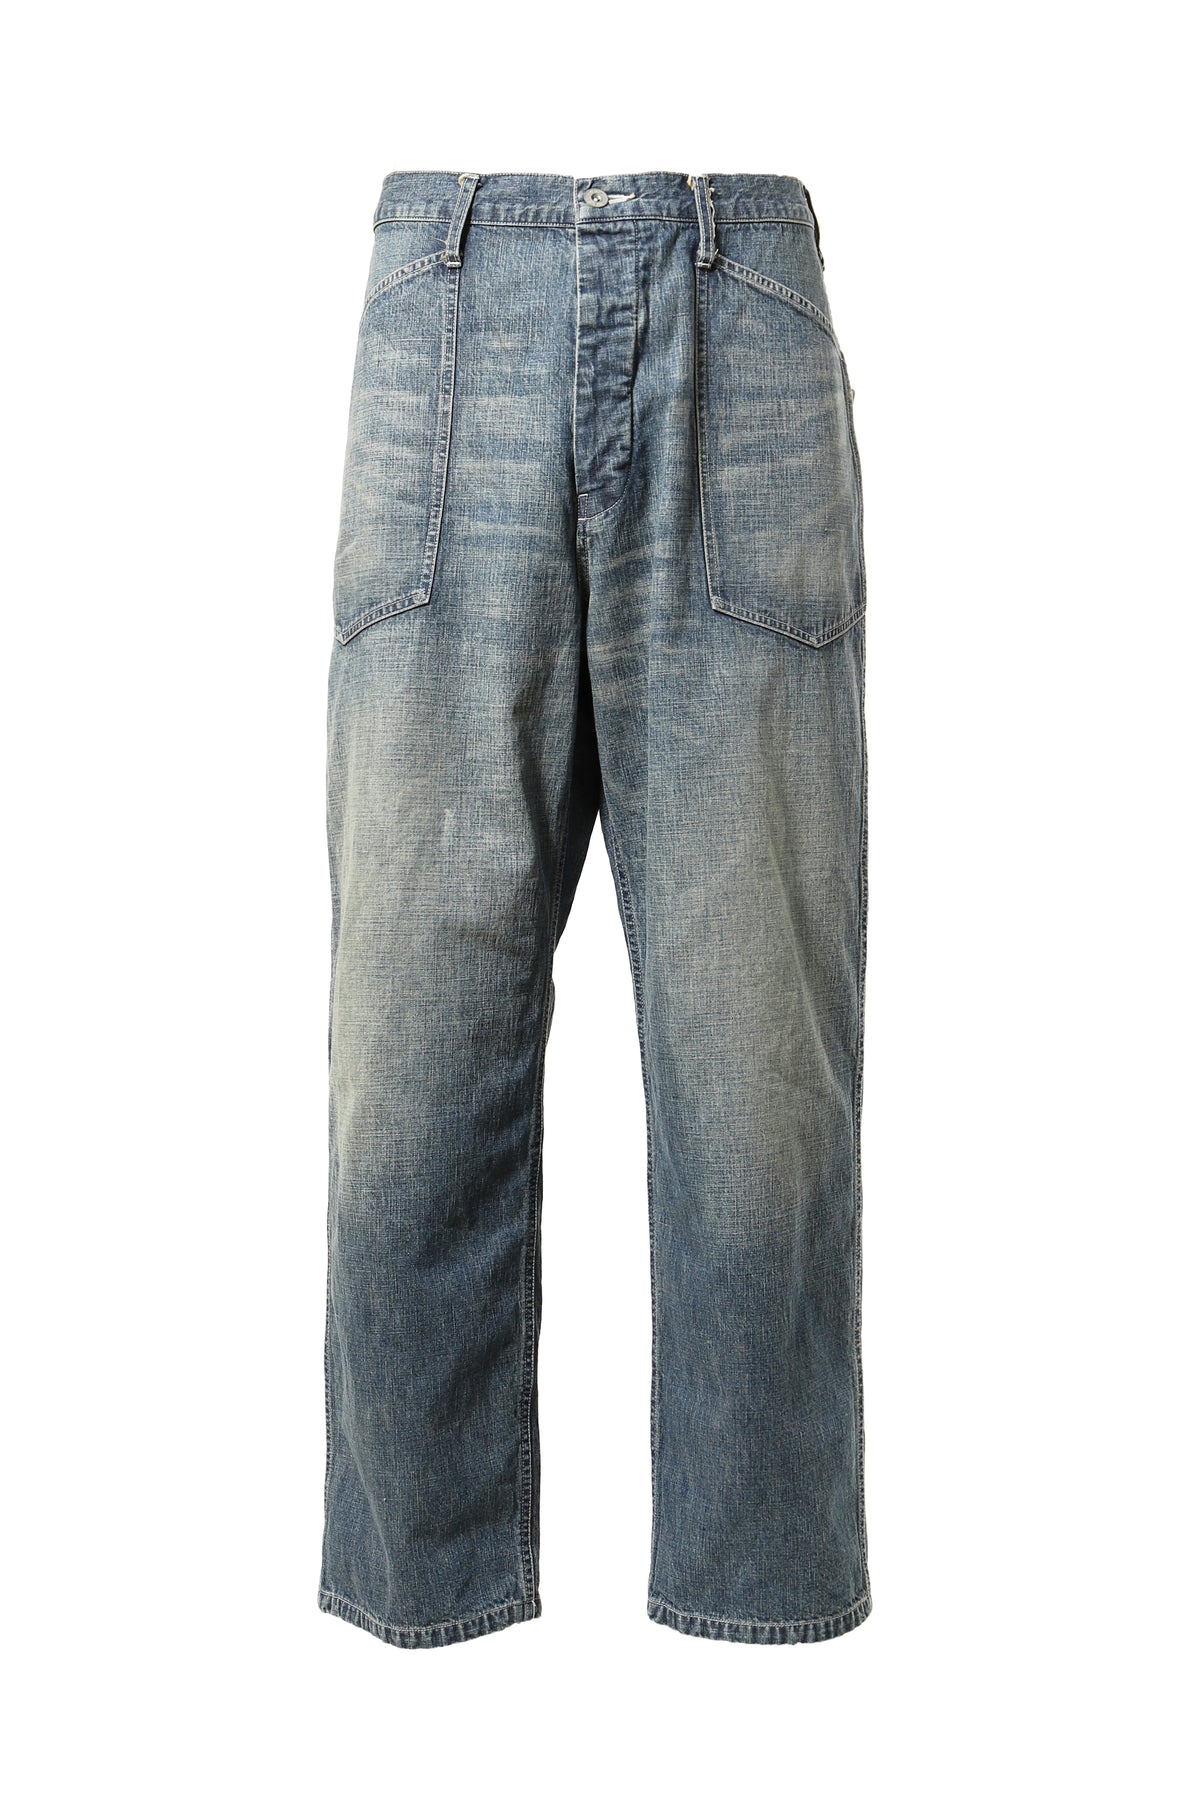 US ARMY M35 DENIM TROUSERS / IND AGEING